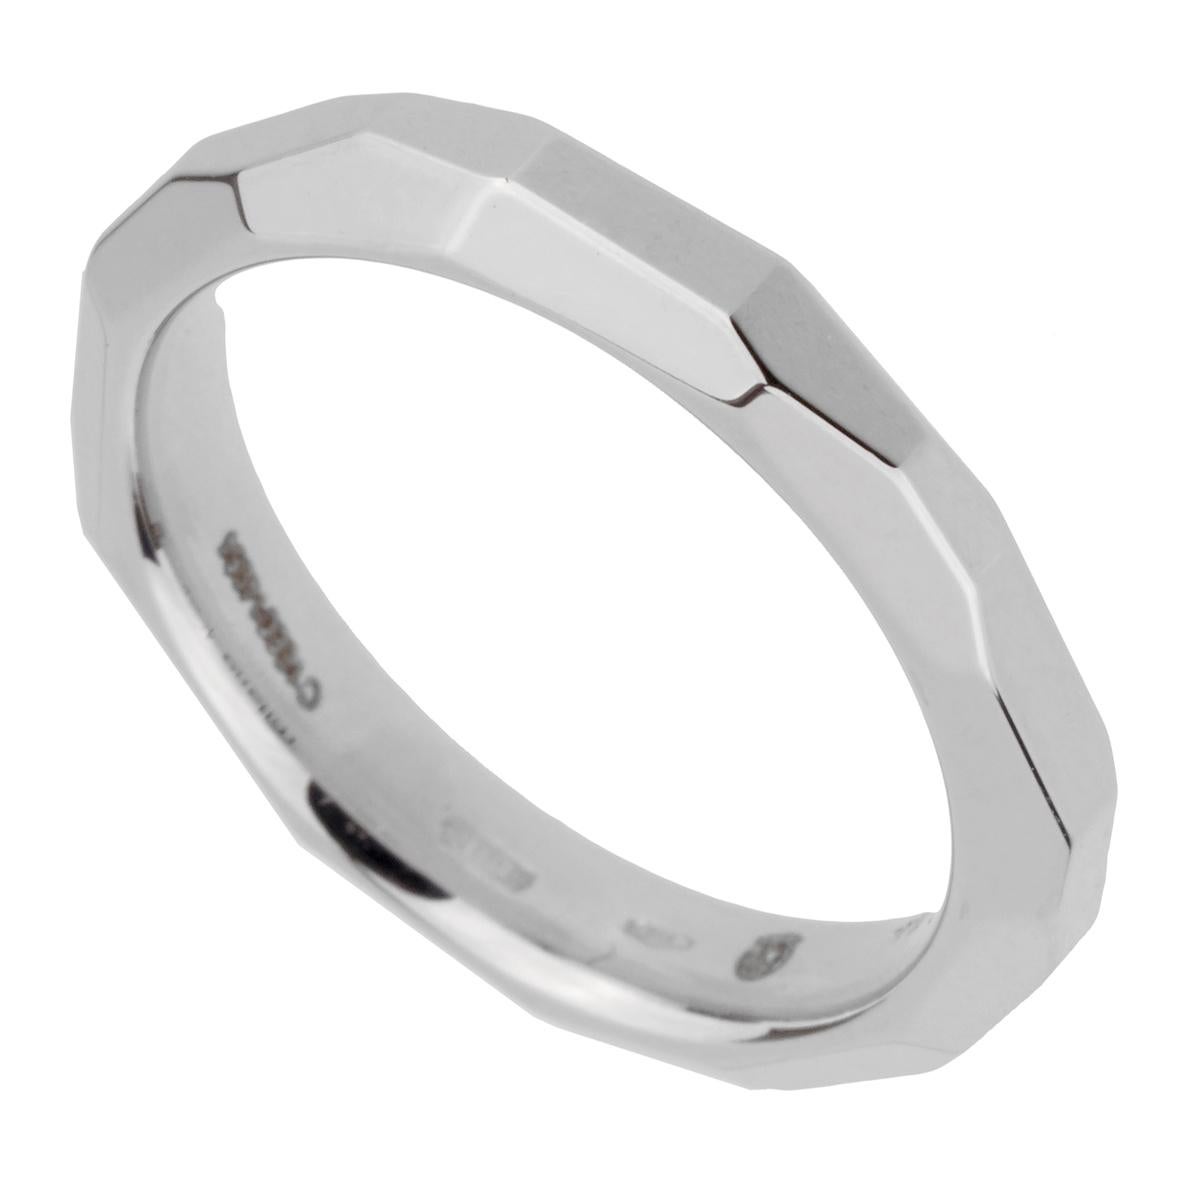 A chic white gold Pomellato band style ring crafted in 18k white gold, The ring measures a size 6.25 and can be resized.

Sku: 2378